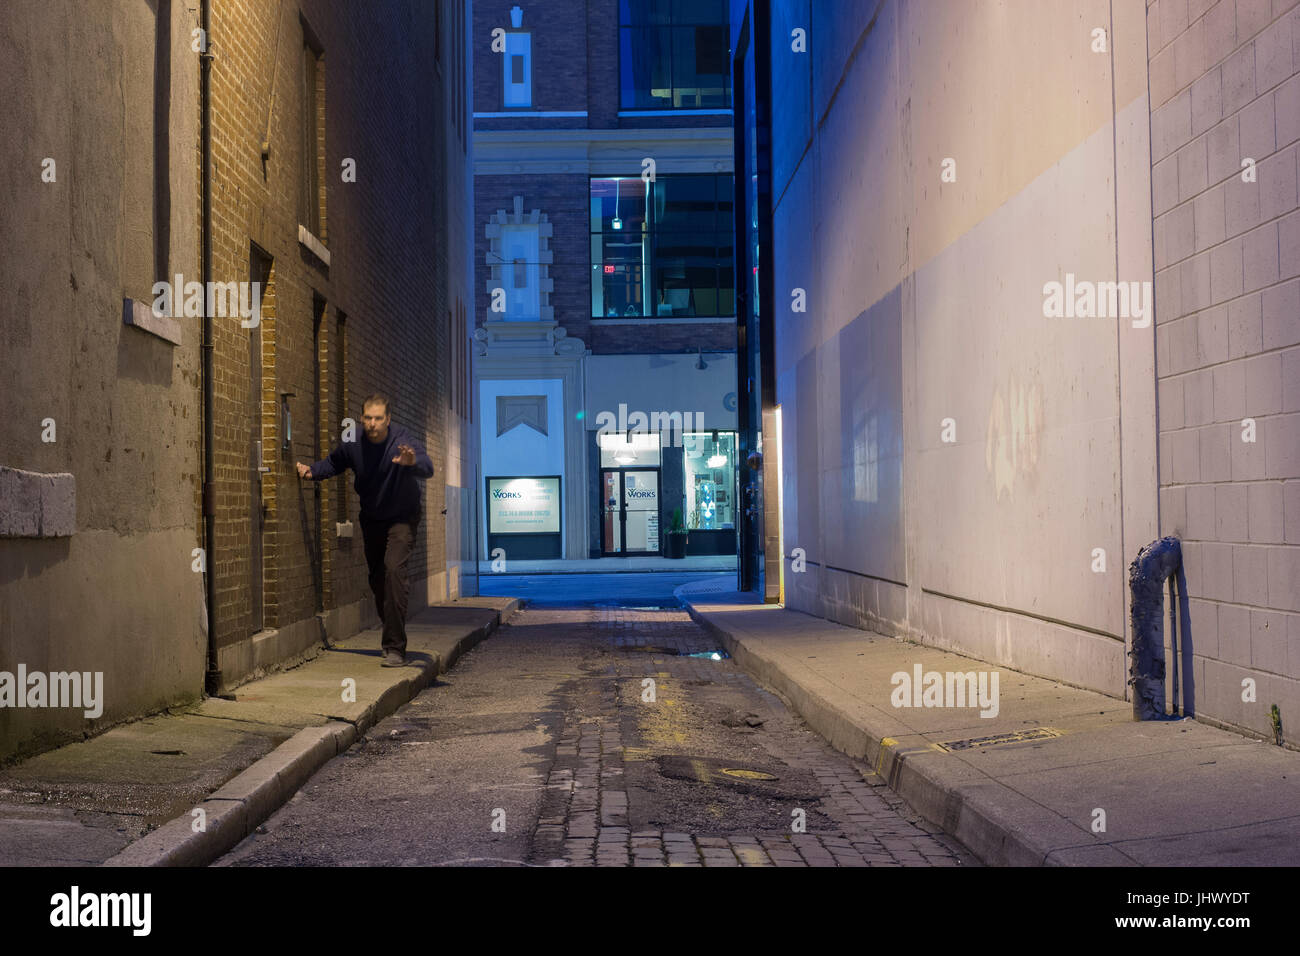 Man in a dark alley appears to be drunk, lost or needs help. Stock Photo